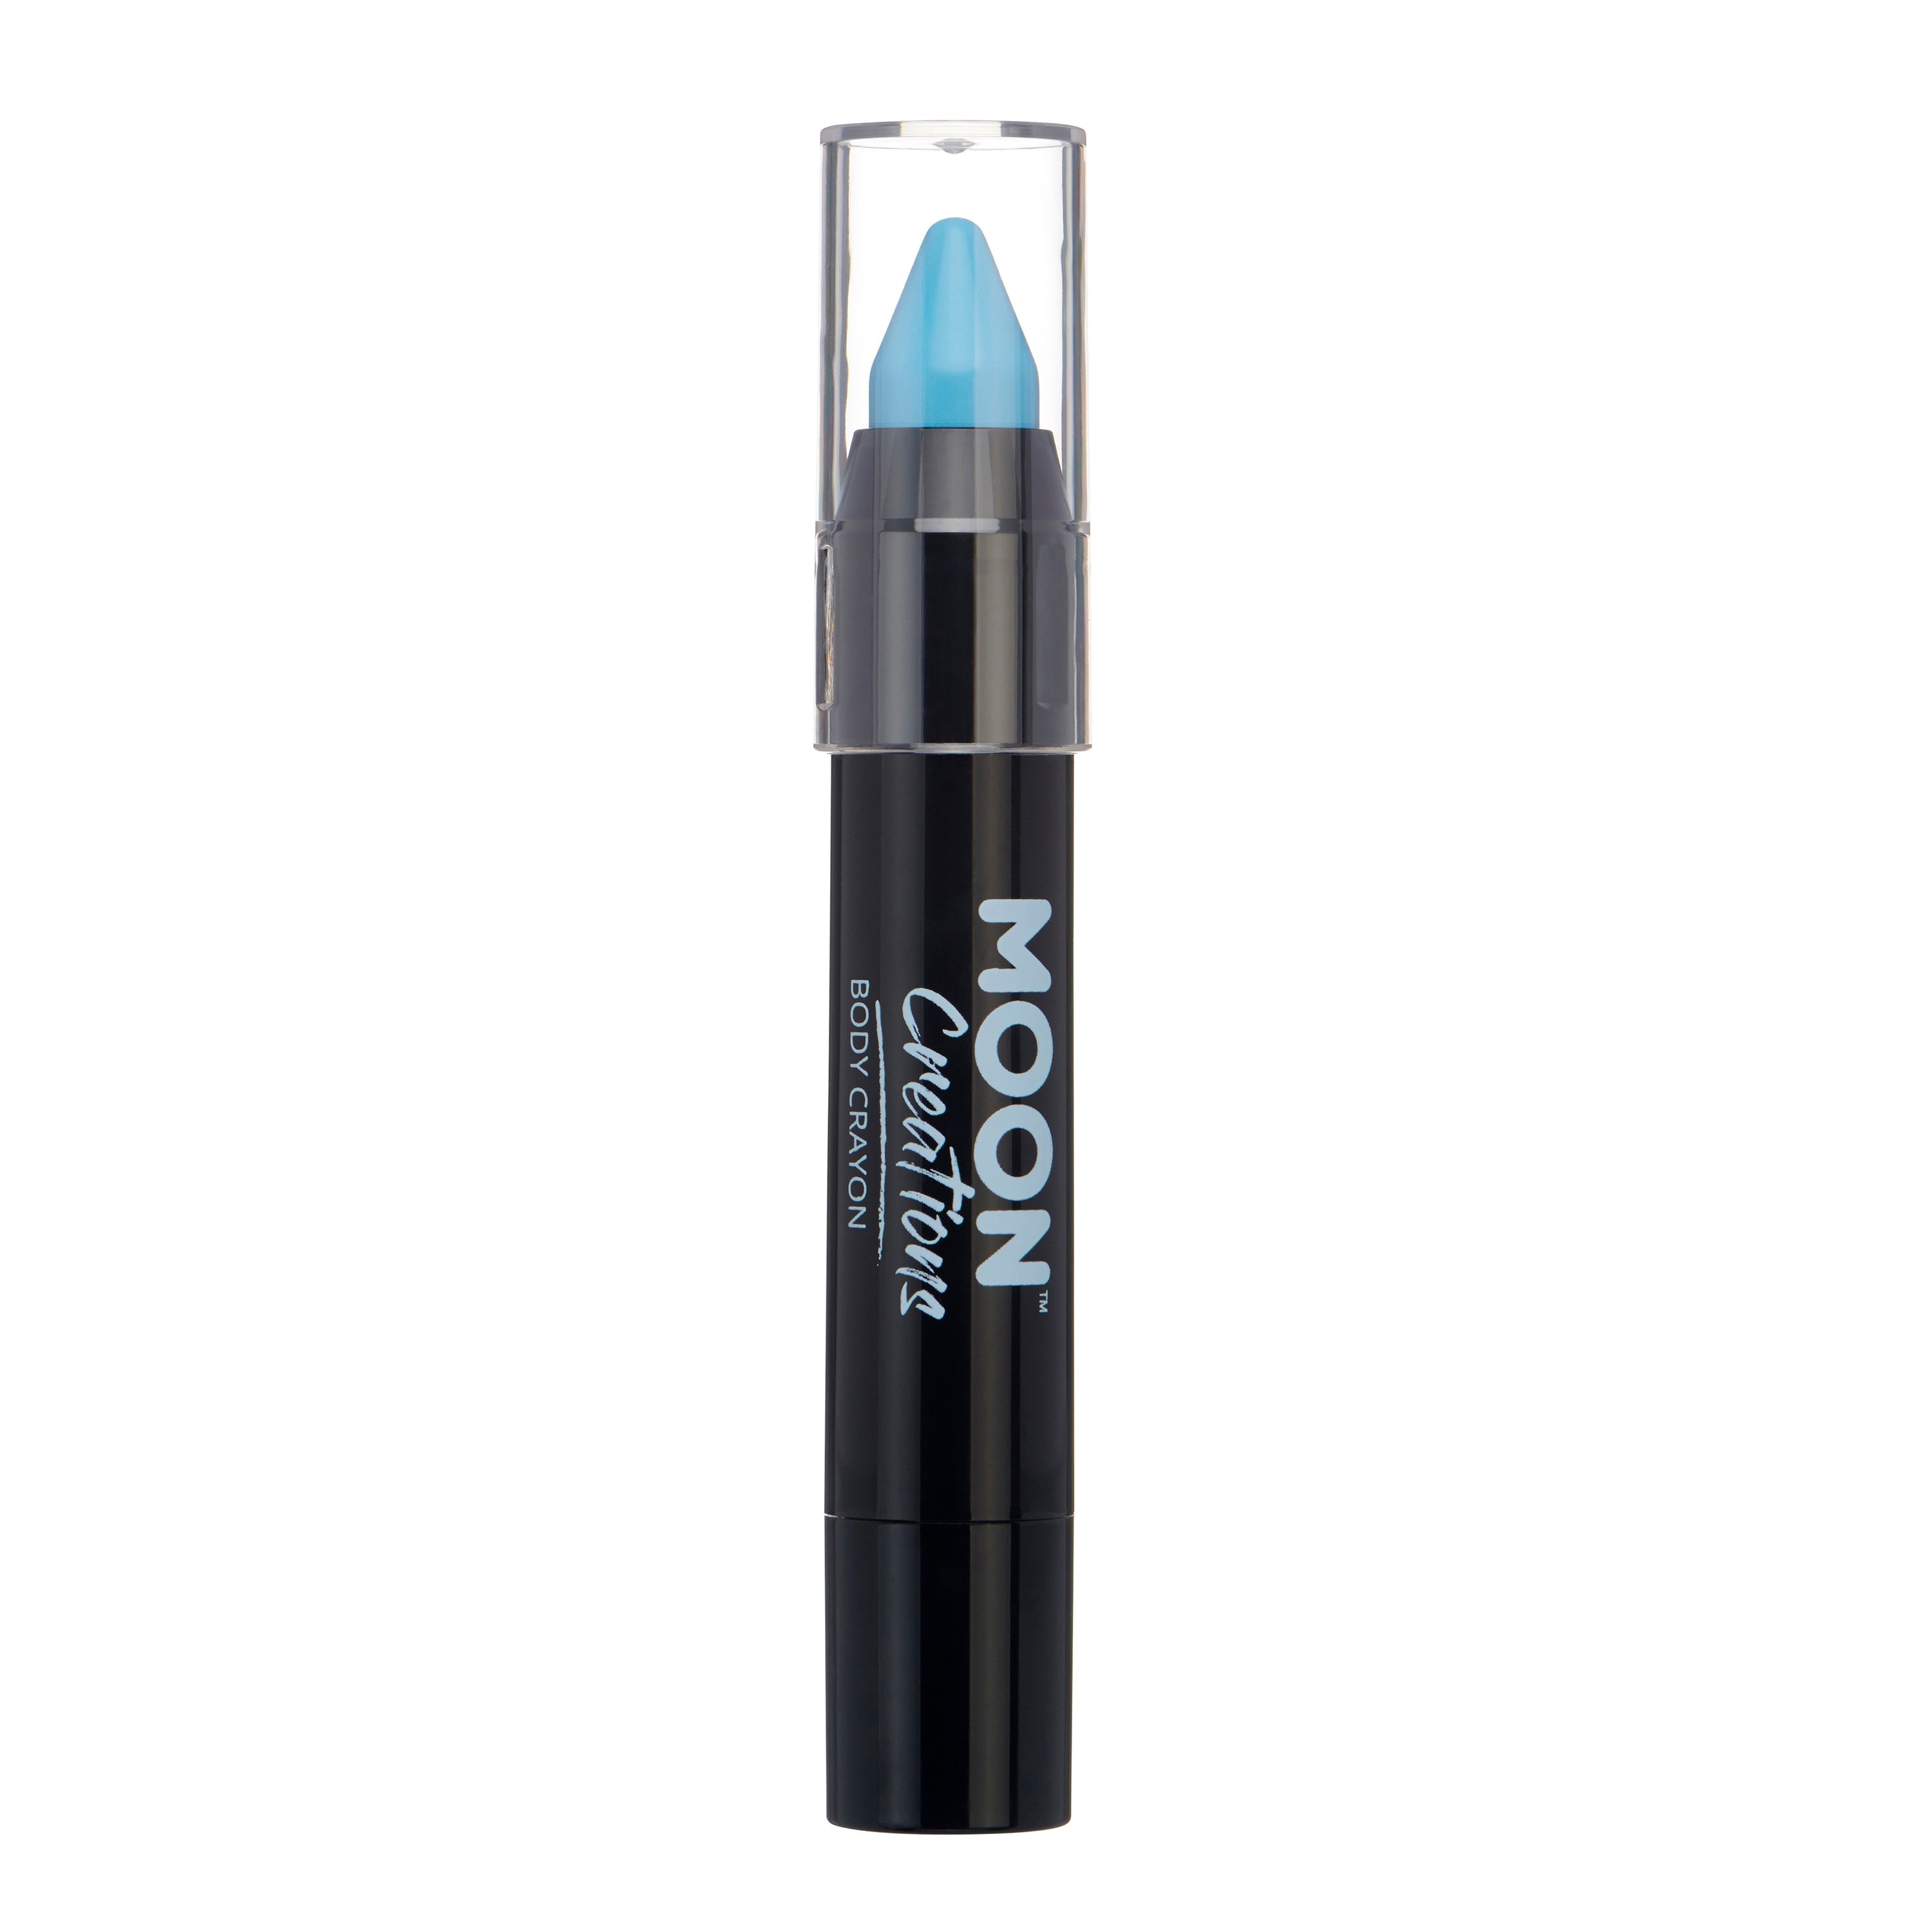 Light Blue - Face & Body Crayon, 3.5g. Cosmetically certified, FDA & Health Canada compliant and cruelty free.